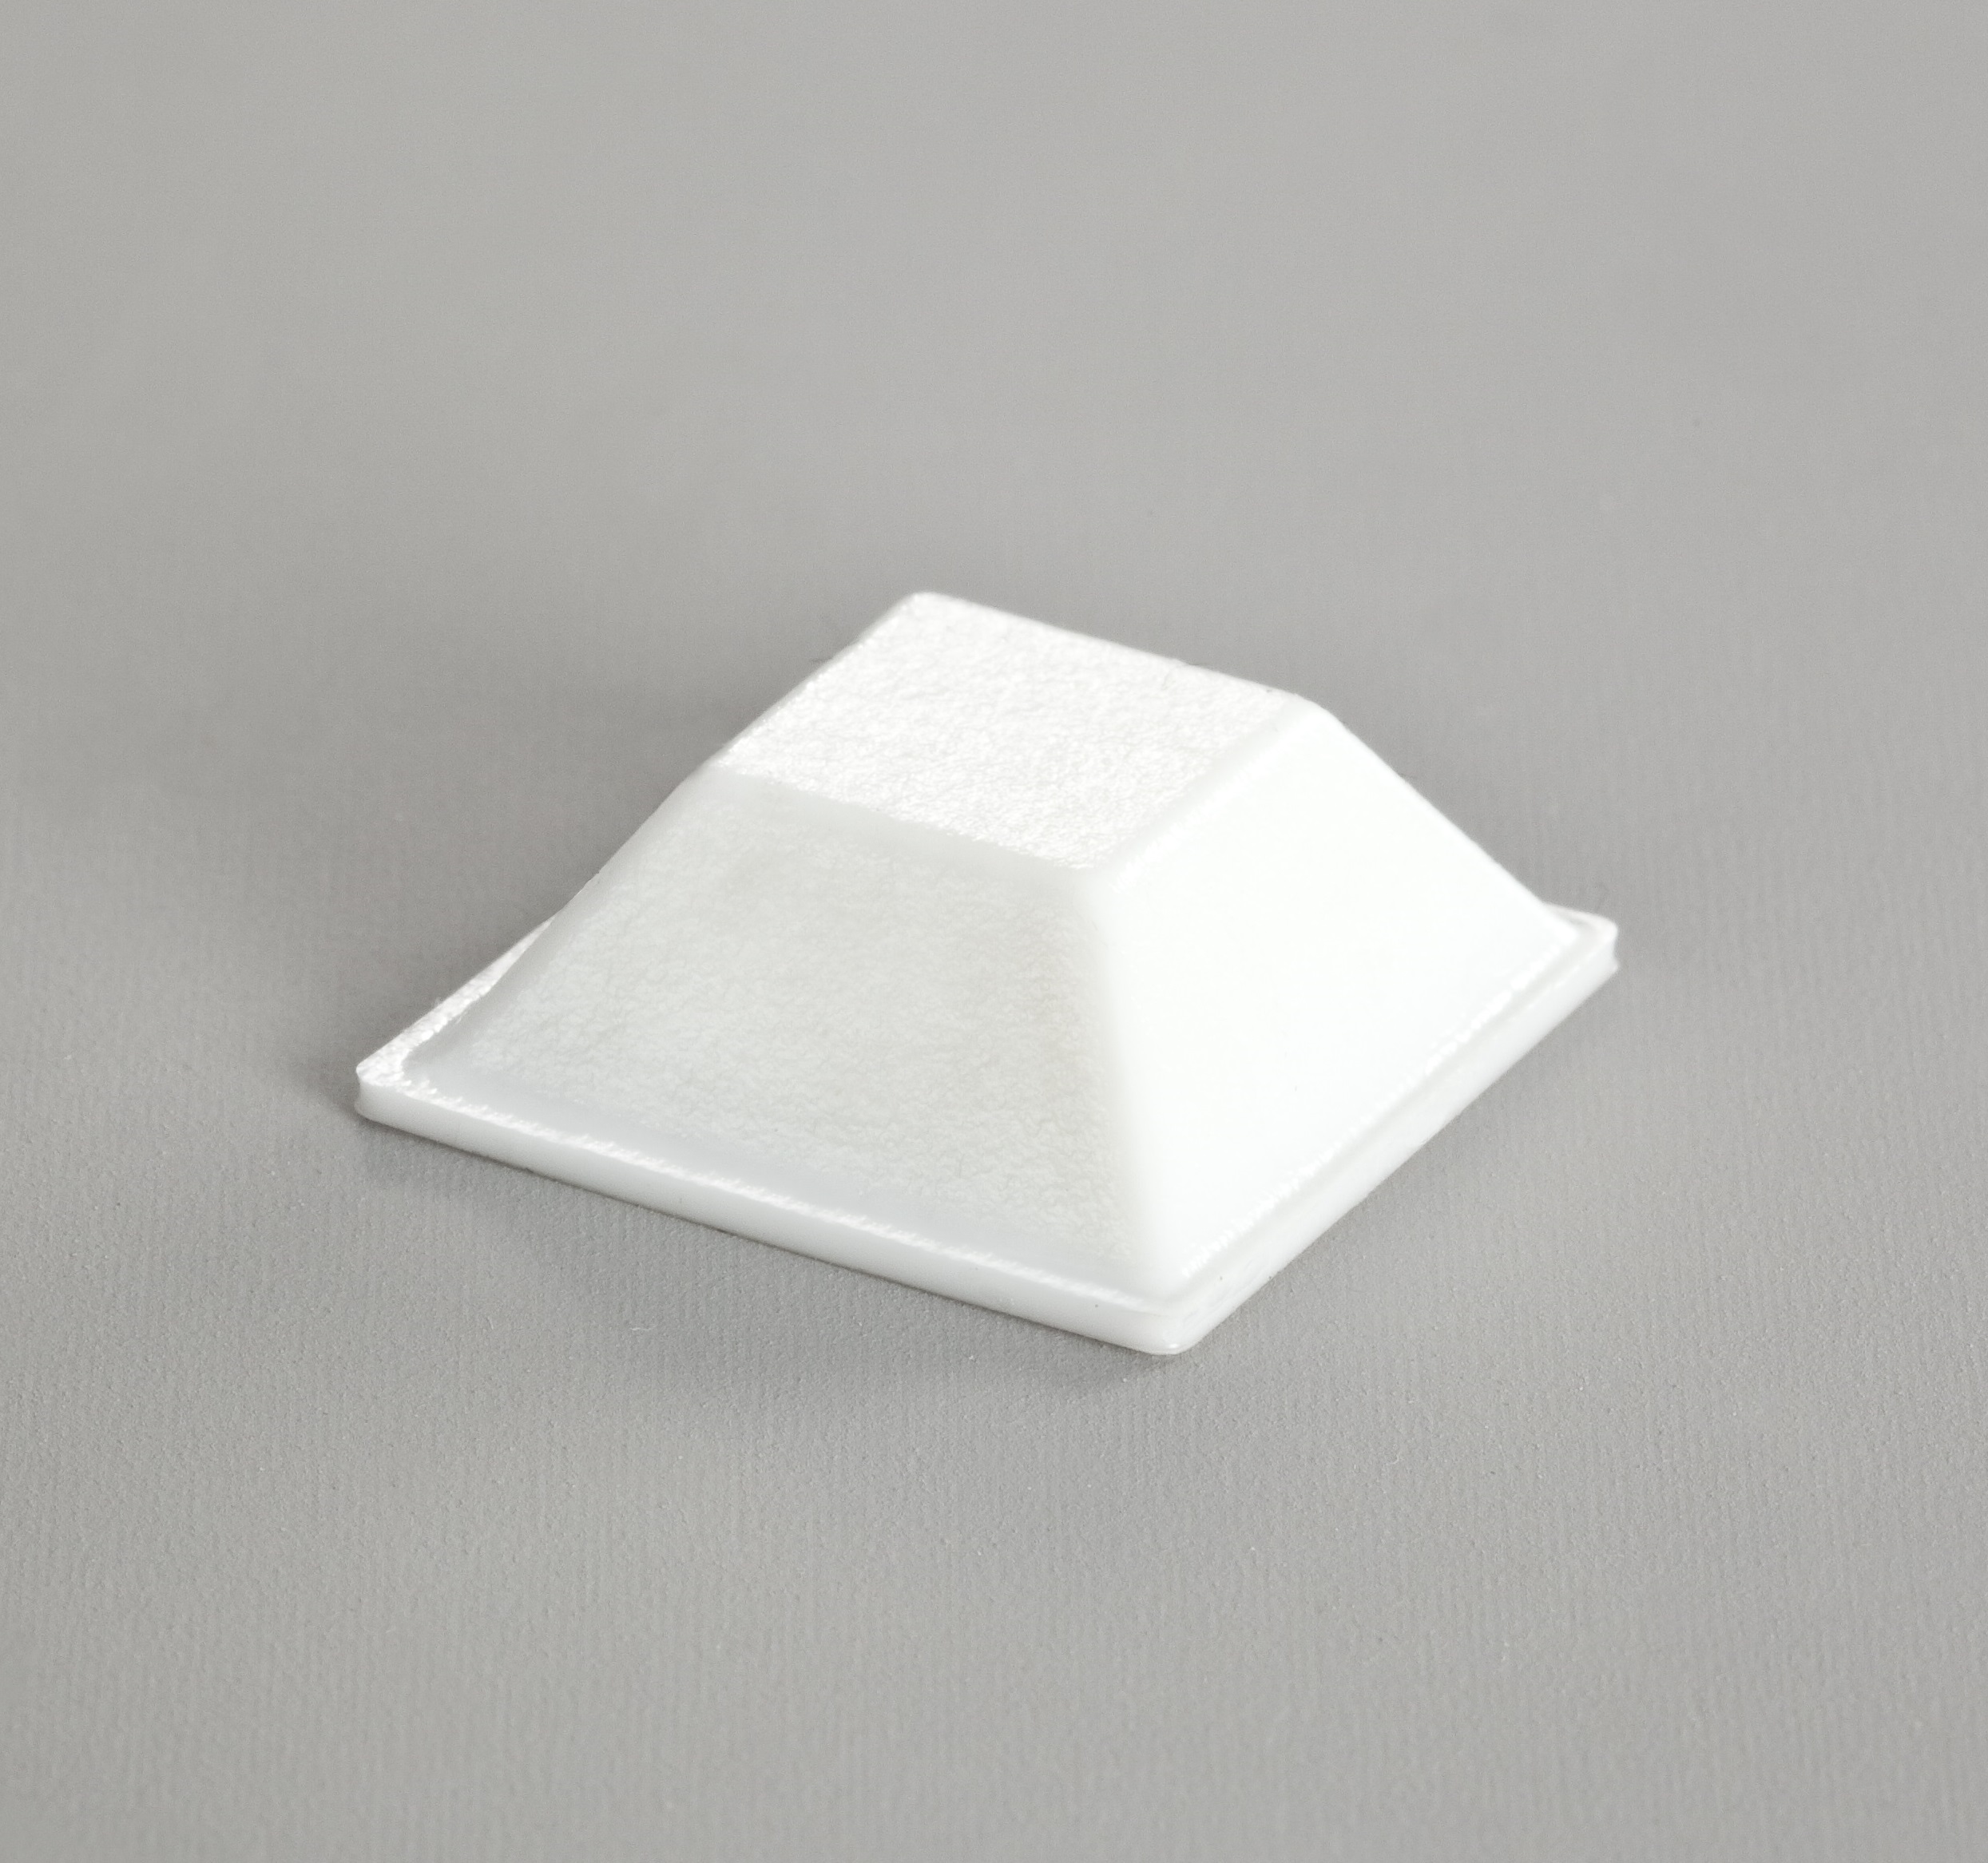 BS-19 WHITE product image